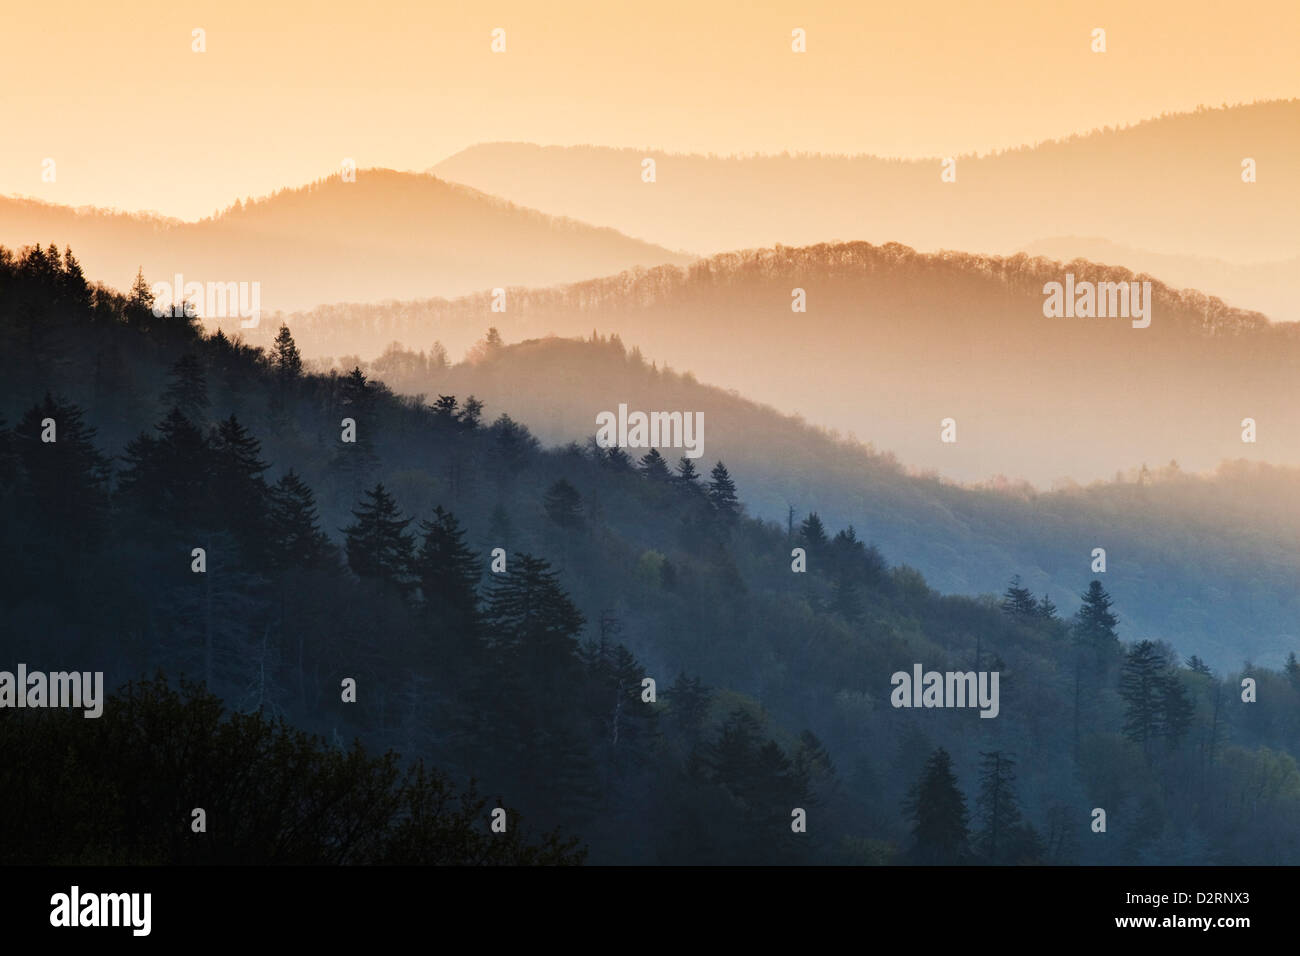 USA, North Carolina. Sunrise view from the Oconaluftee Overlook in the Great Smoky Mountains National Park. Stock Photo